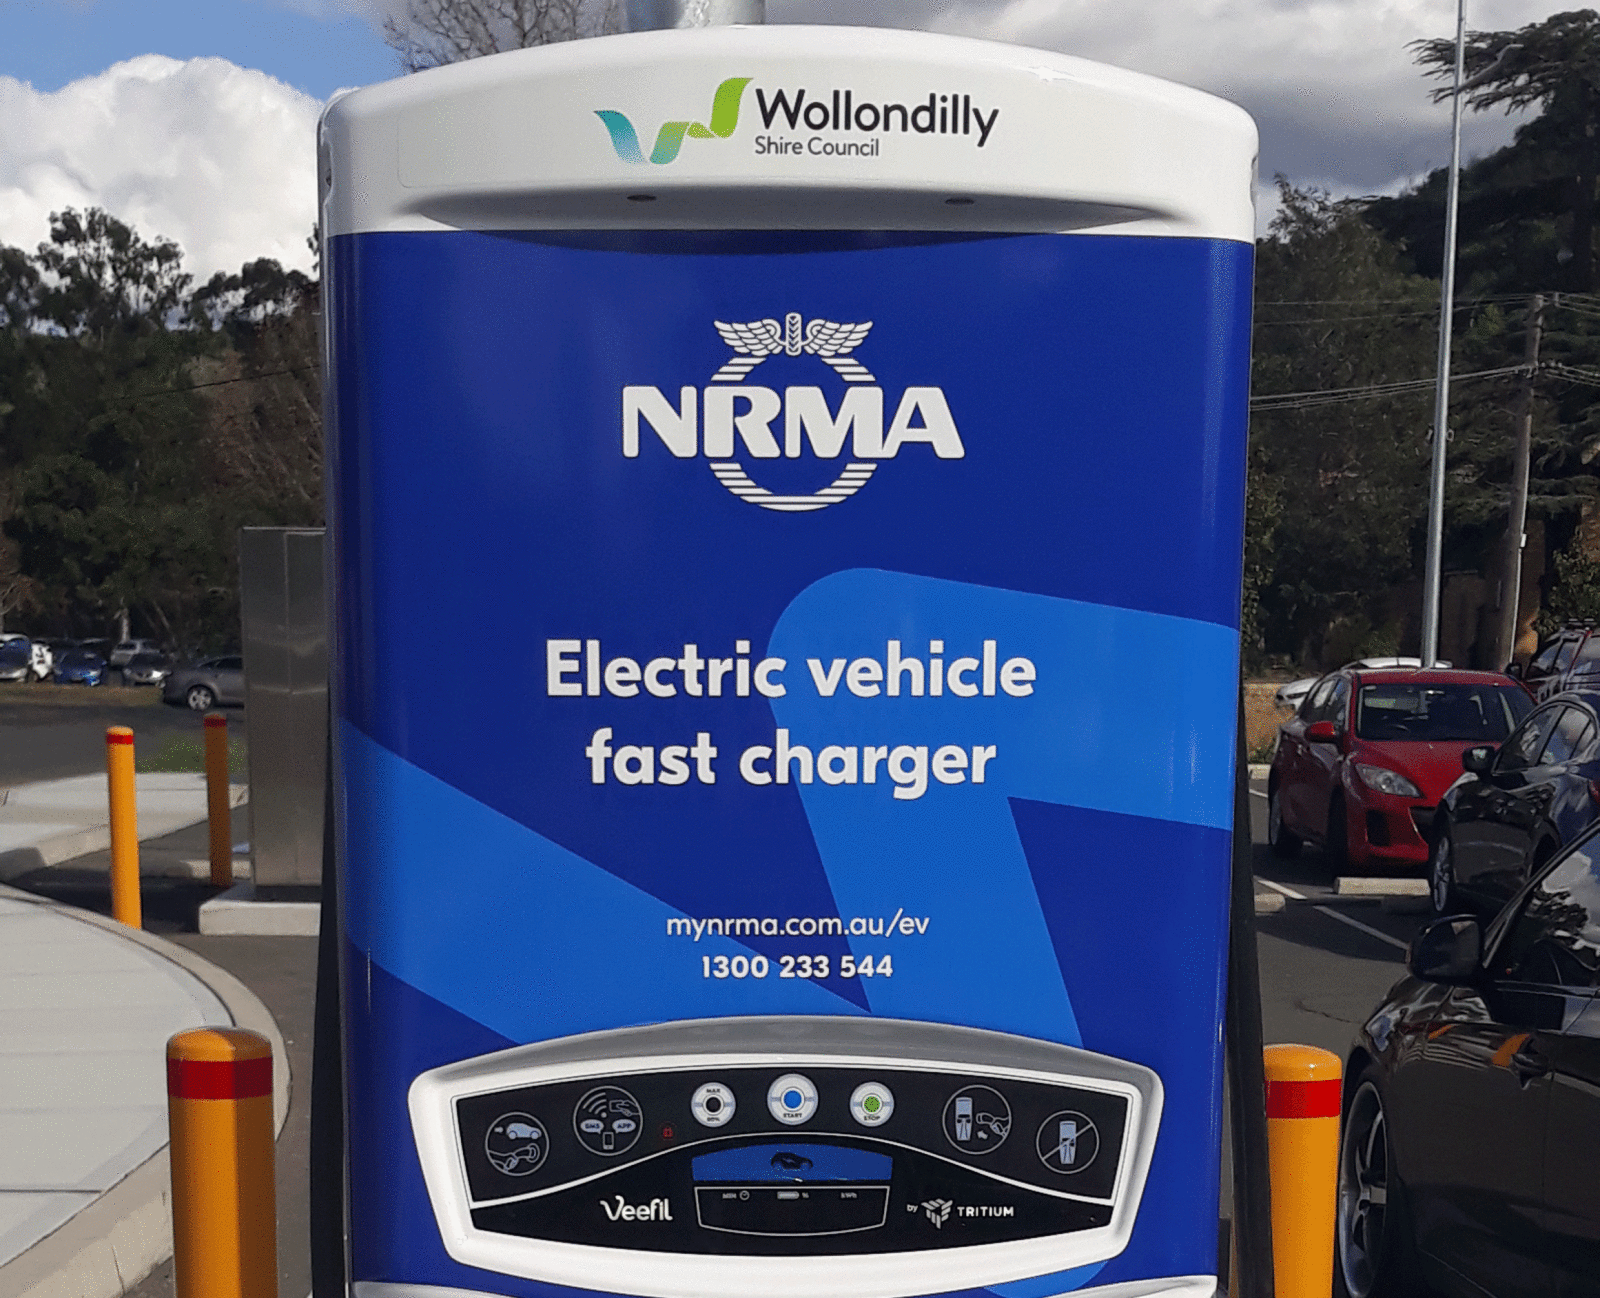 Electronic Vehicle Charger in Picton Car Park